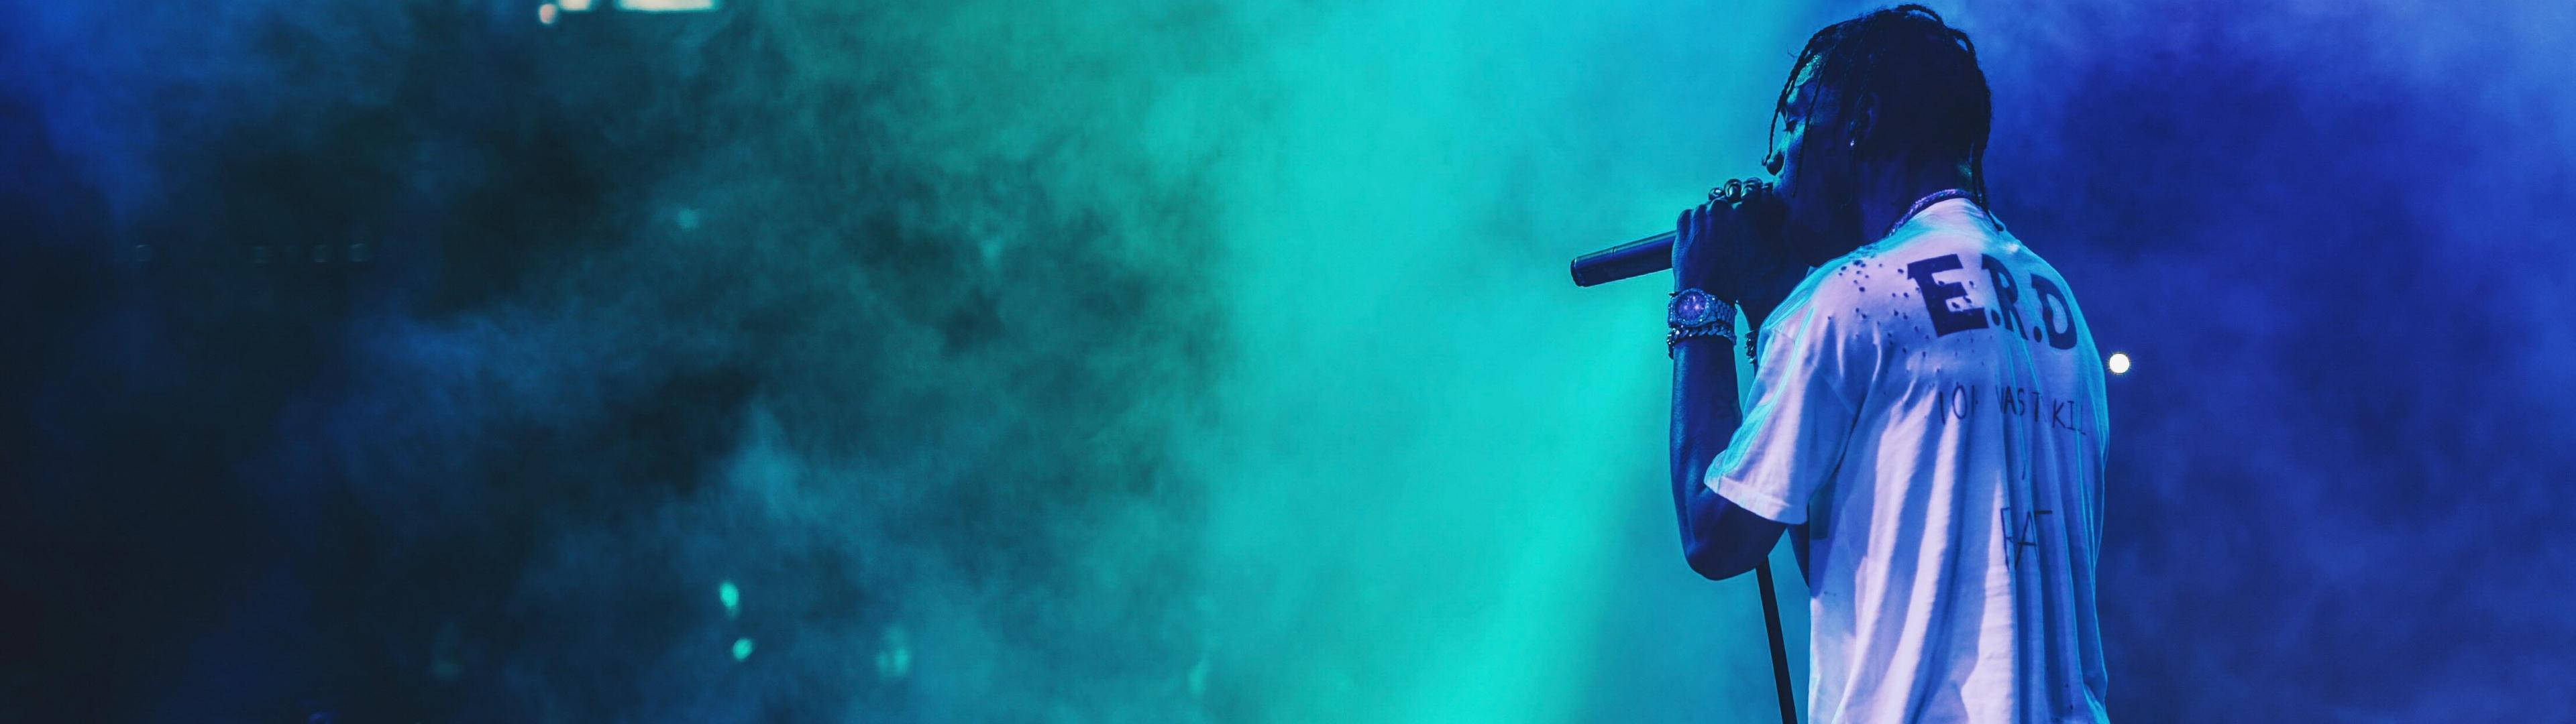 A Man Is Standing On Stage With Smoke Coming Out Of His Mouth Background